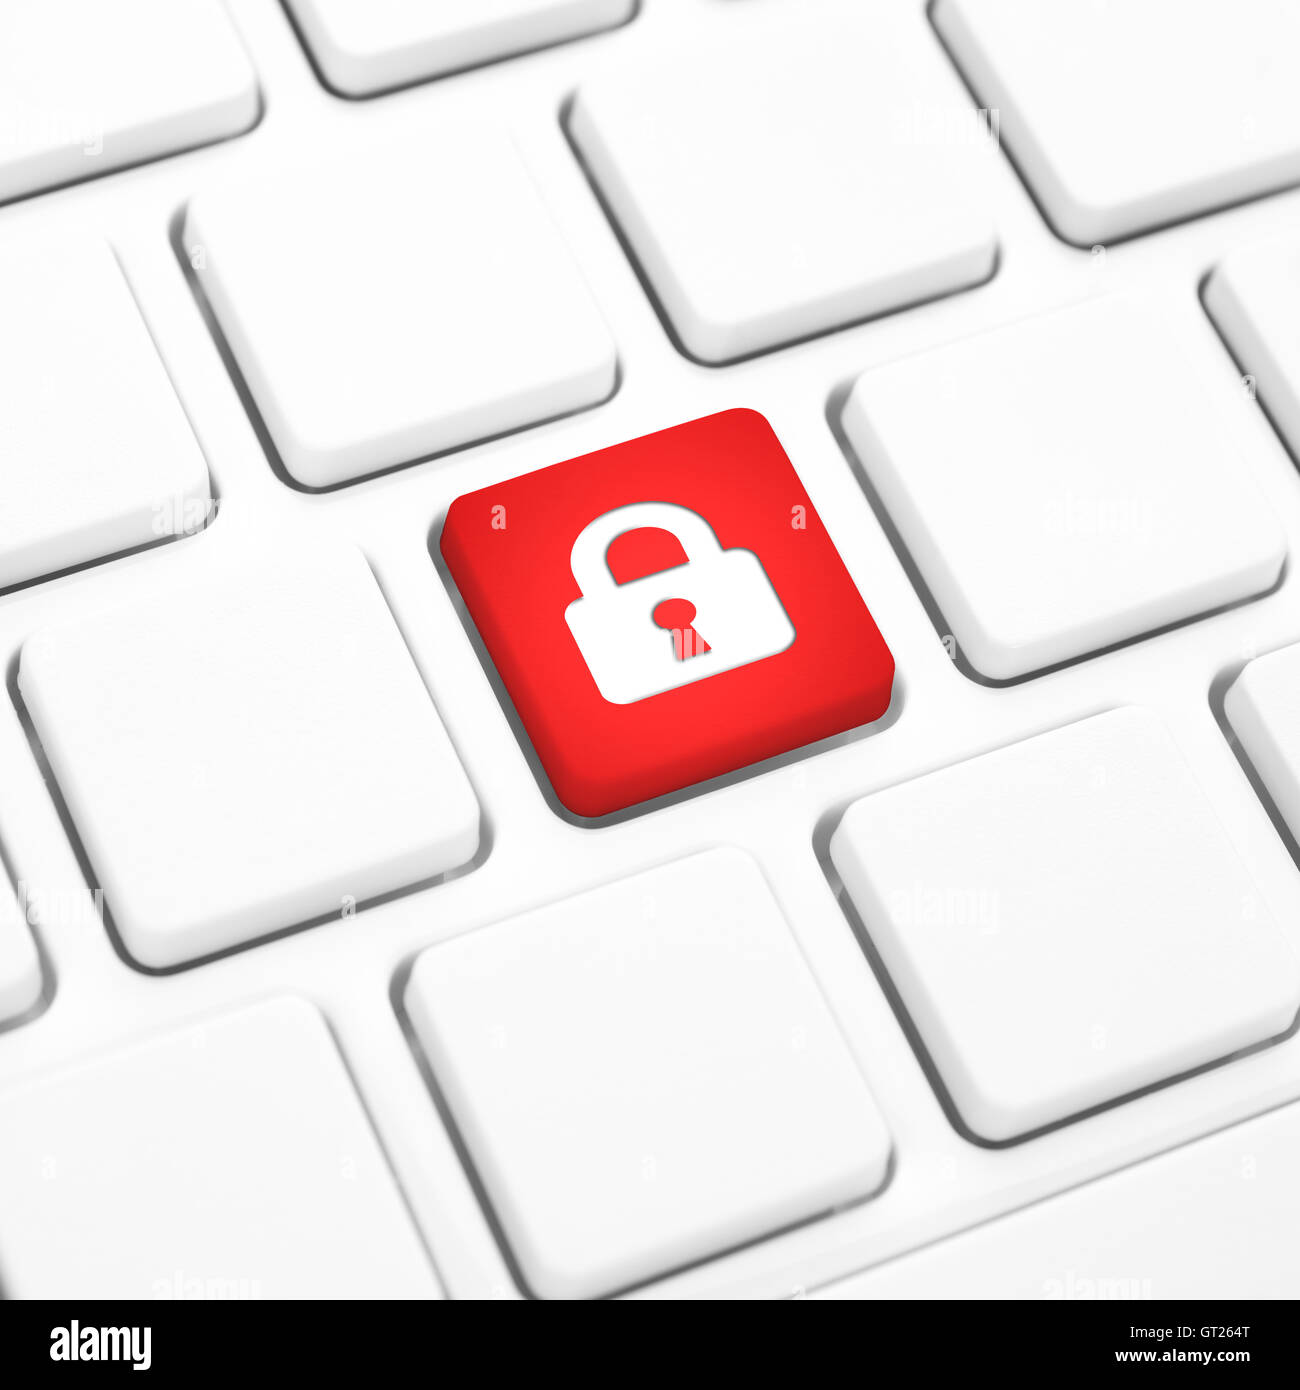 Security internet login concept, red lock button or key on white keyboard Stock Photo